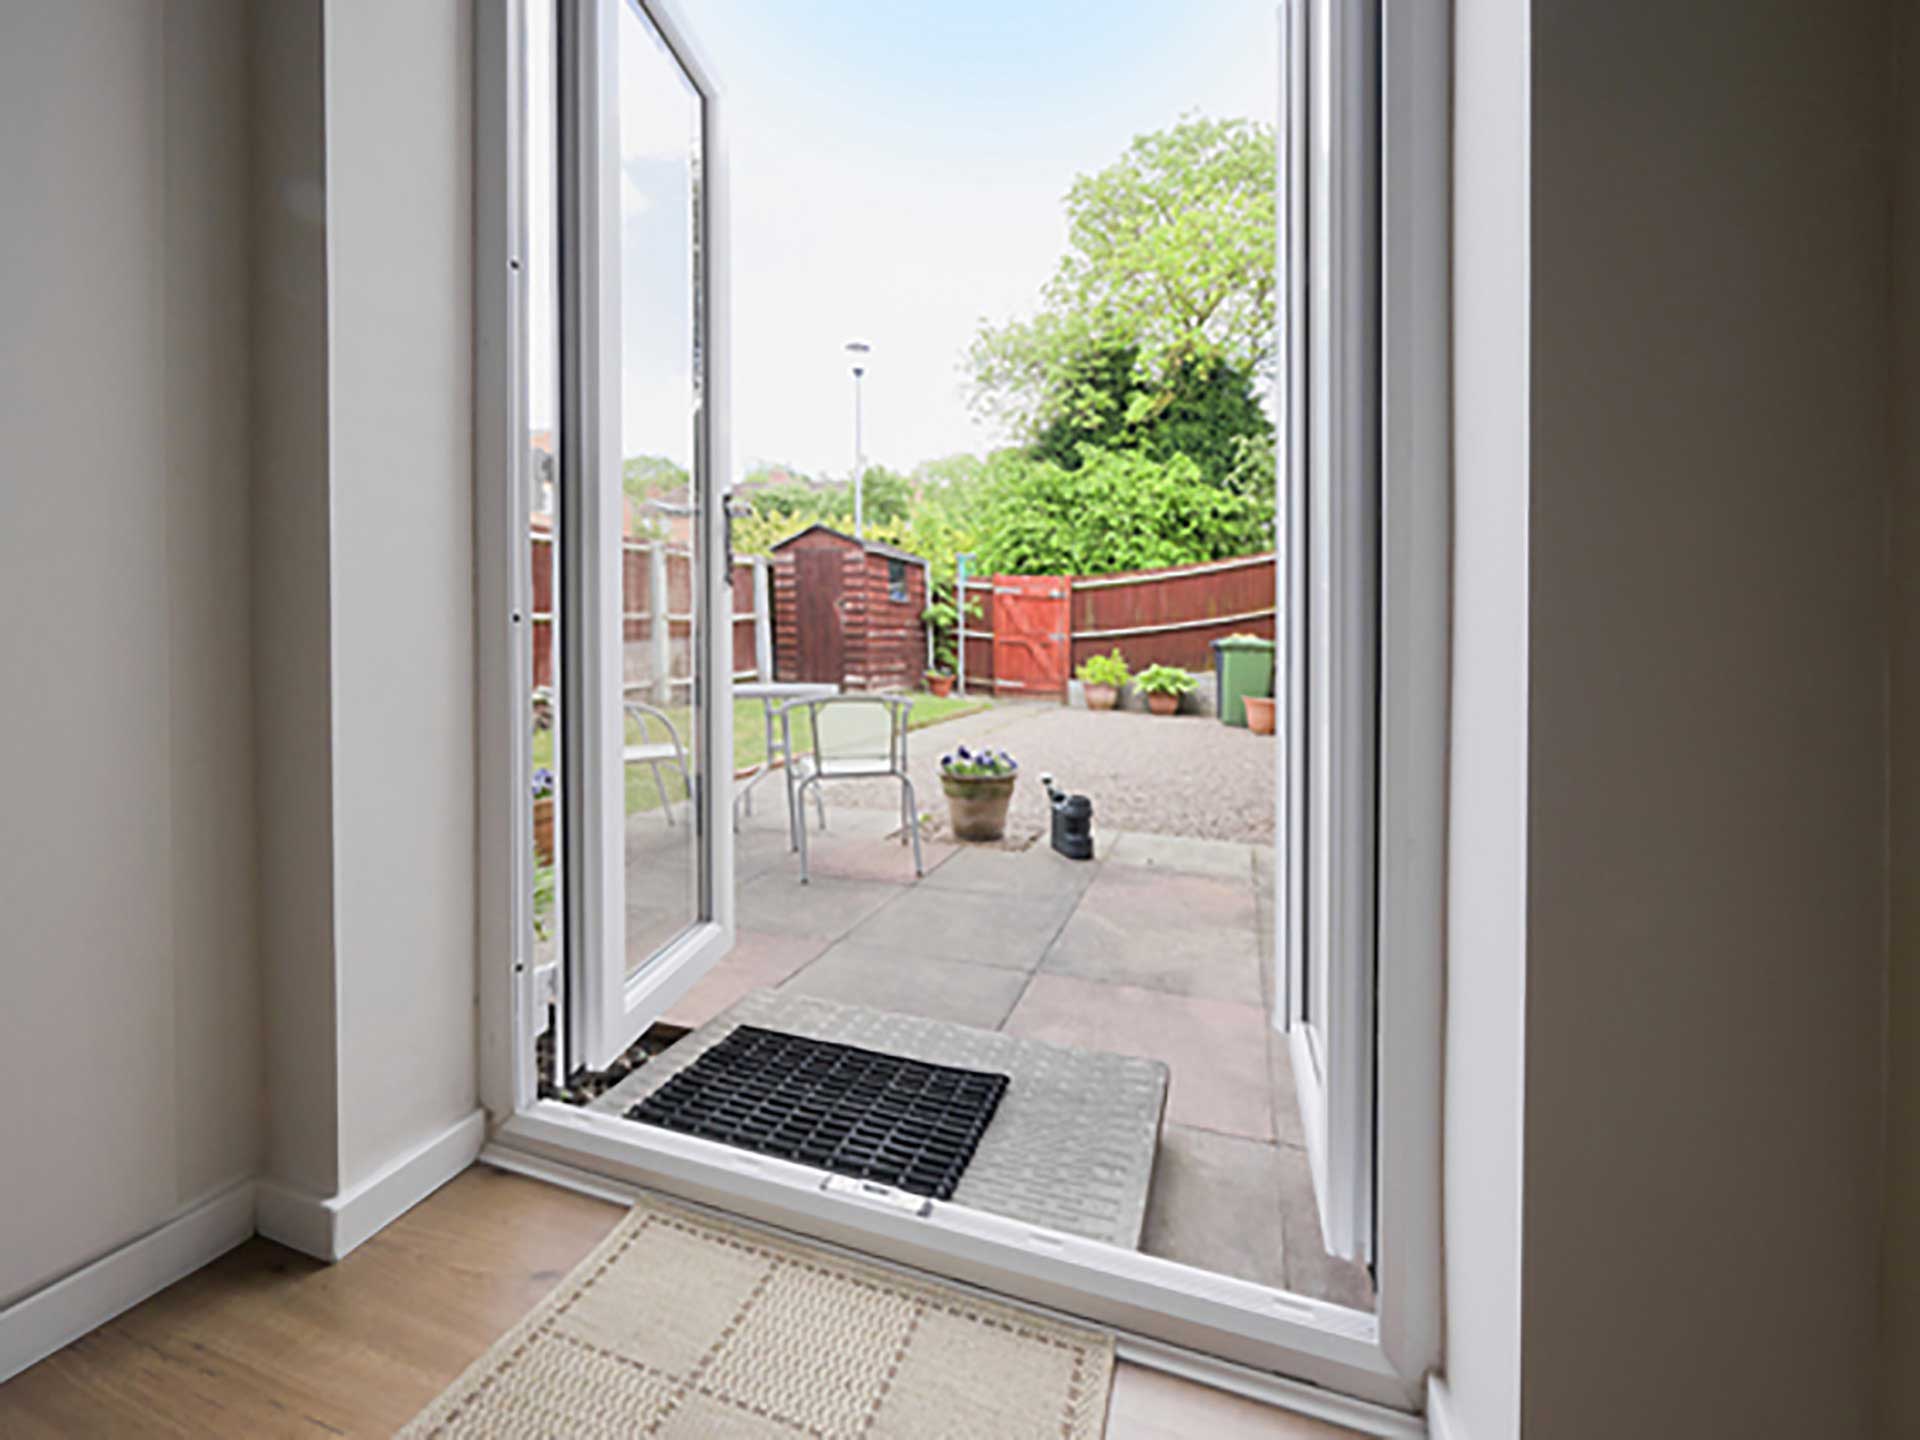 Liniar french doors opened out onto a family home patio and garden